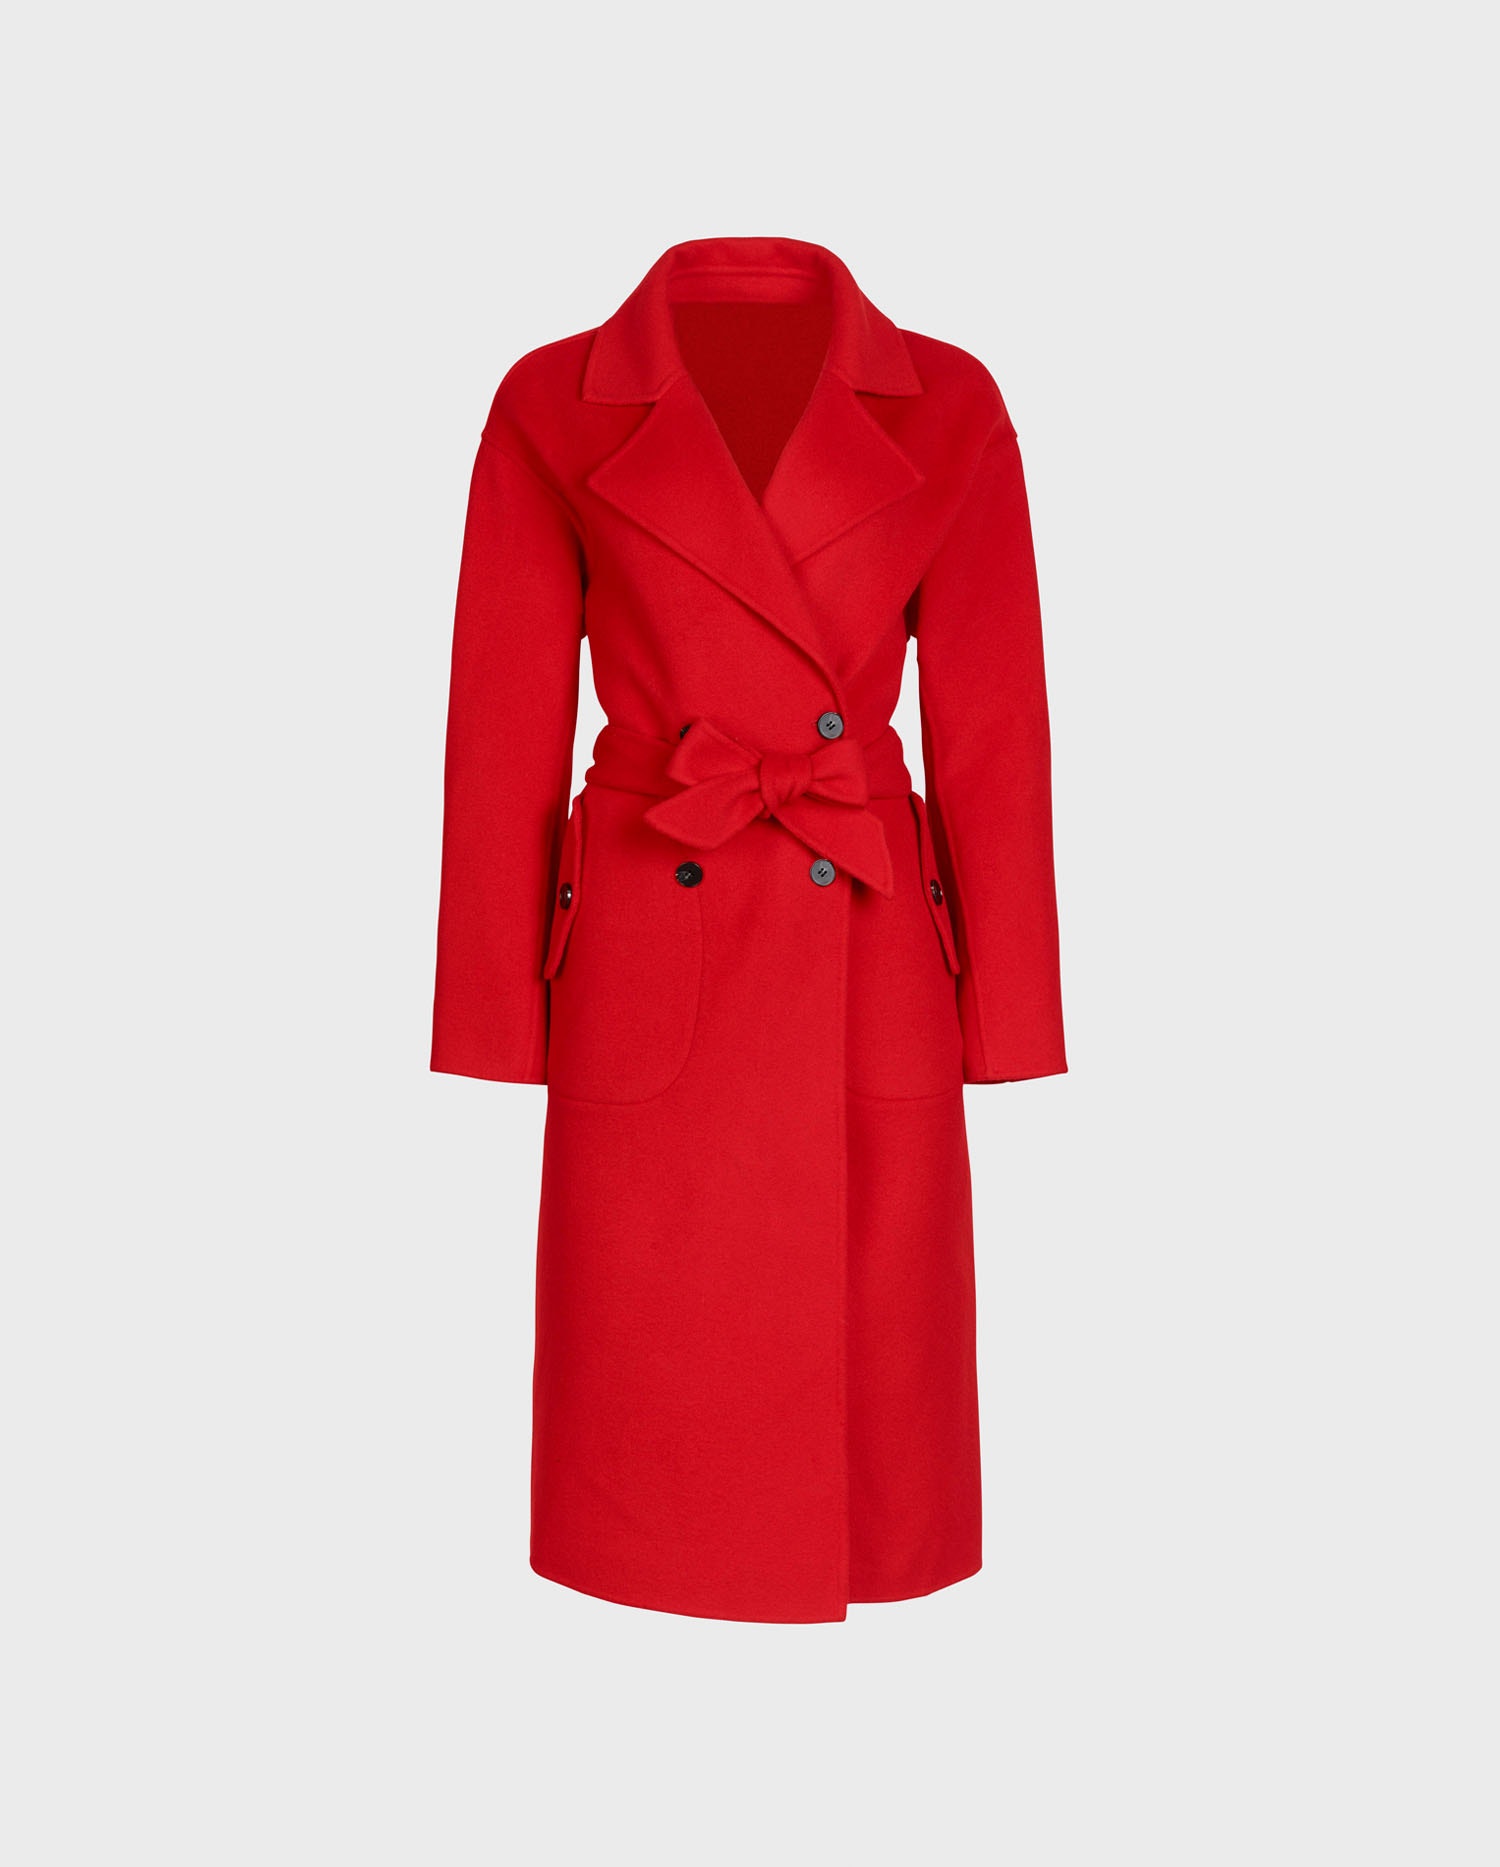 Discover The CODEX Trench coat with large notched collar and tie waist belt from ANNE FONTAINE